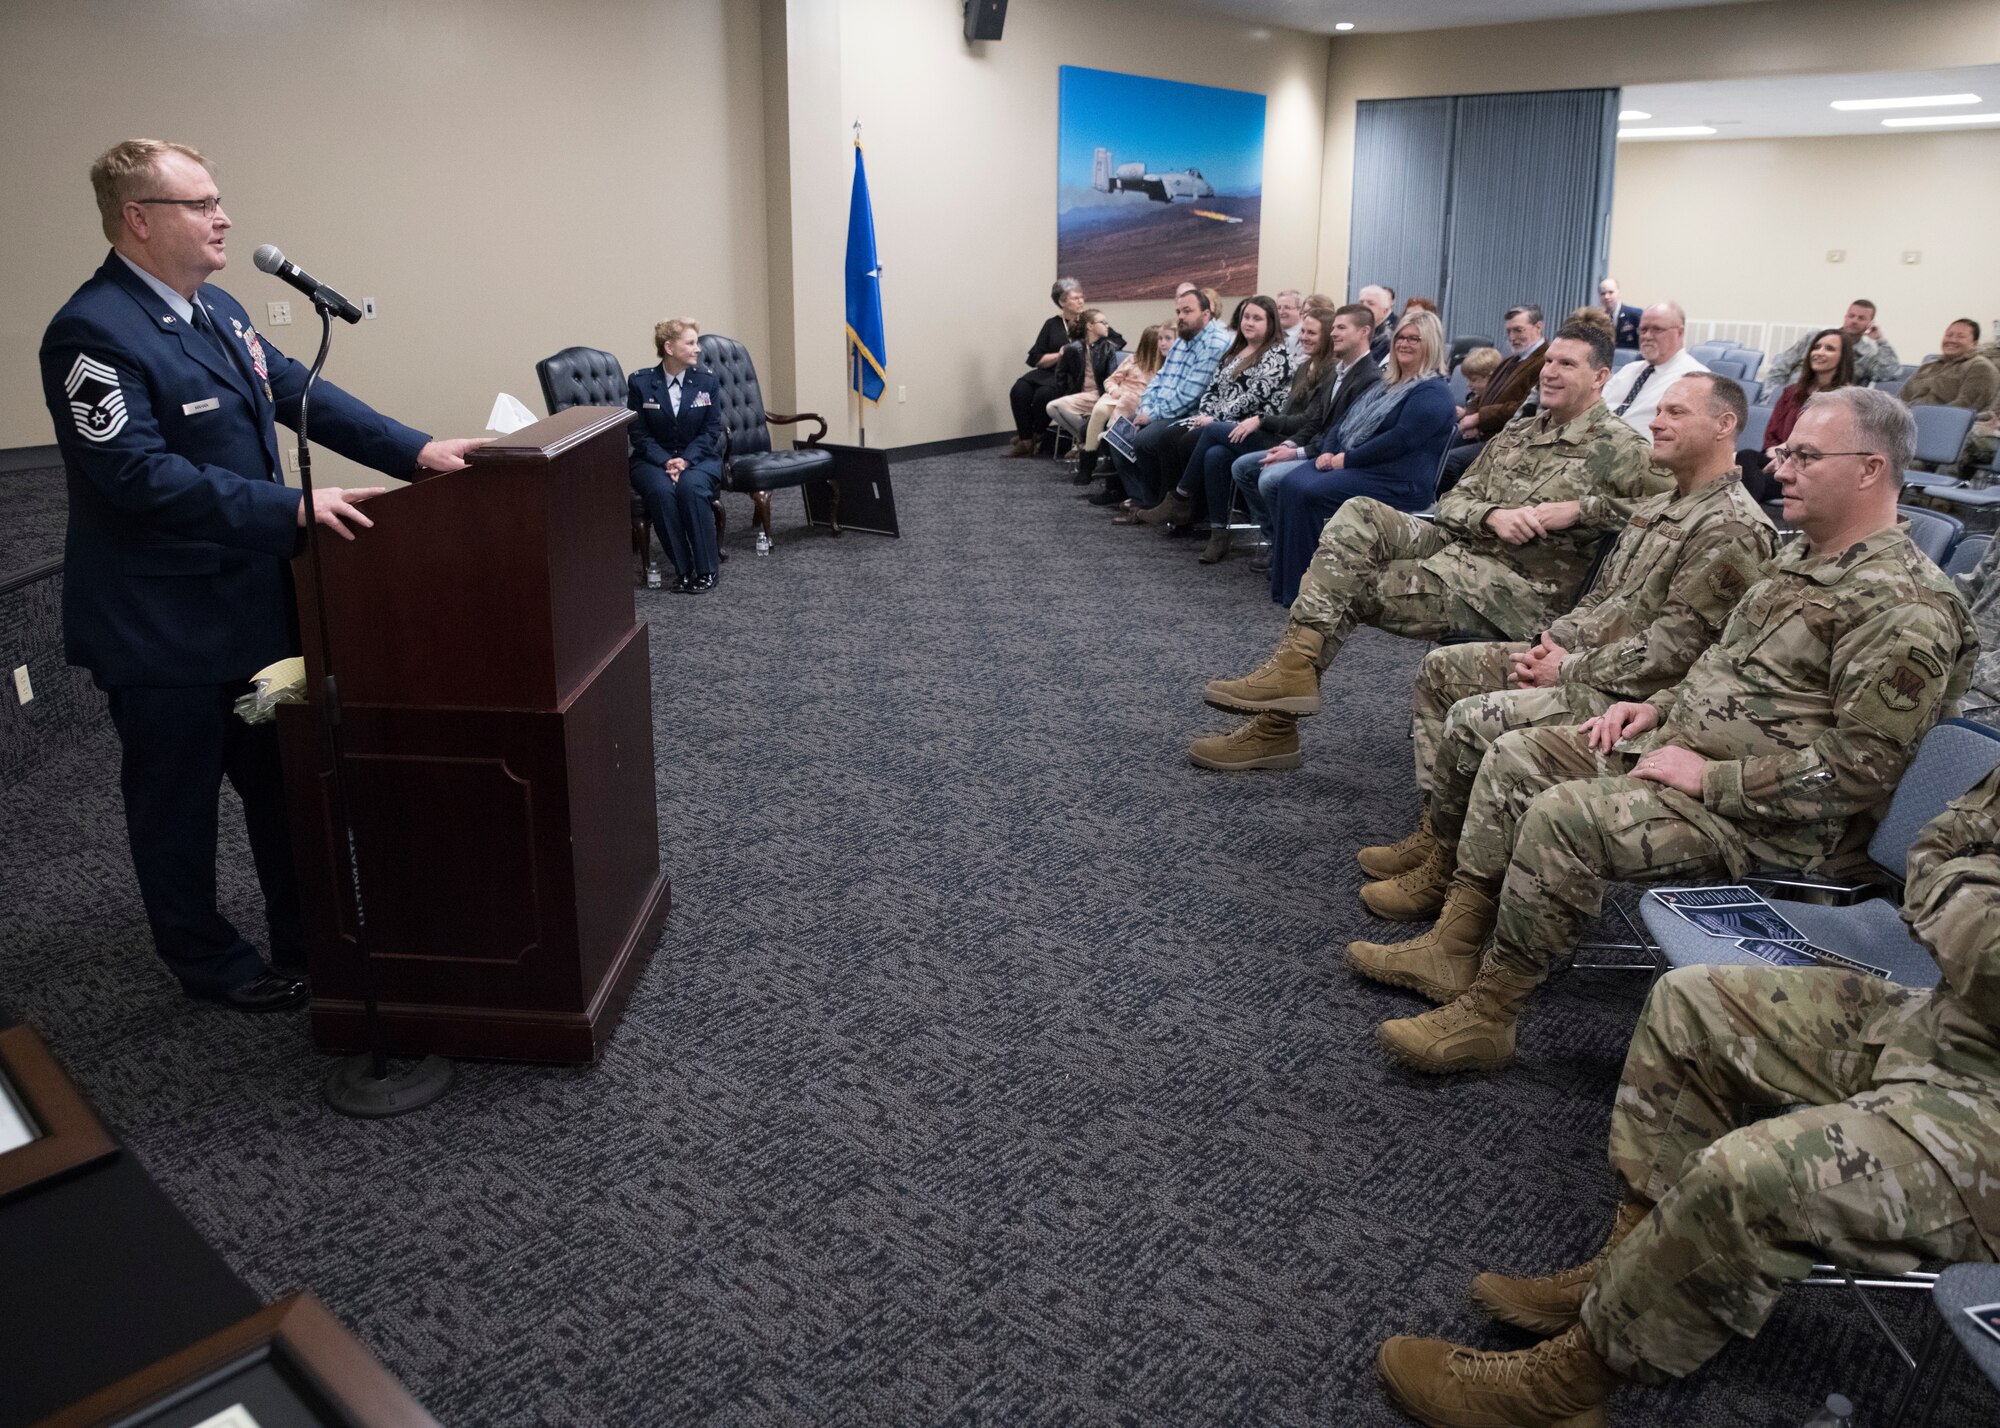 Chief Master Sgt. Edgar S. Mahan,188th Mission Support Group chief, addresses members of the 188th Wing during his retirement ceremony at Ebbing Air National Guard Base, Ark., Jan. 11, 2020. Mahan served 30 years in the United States armed forces including the Marines, Army National Guard, and Air National Guard. (U.S. Air National Guard photo by Tech. Sgt. Daniel Condit)